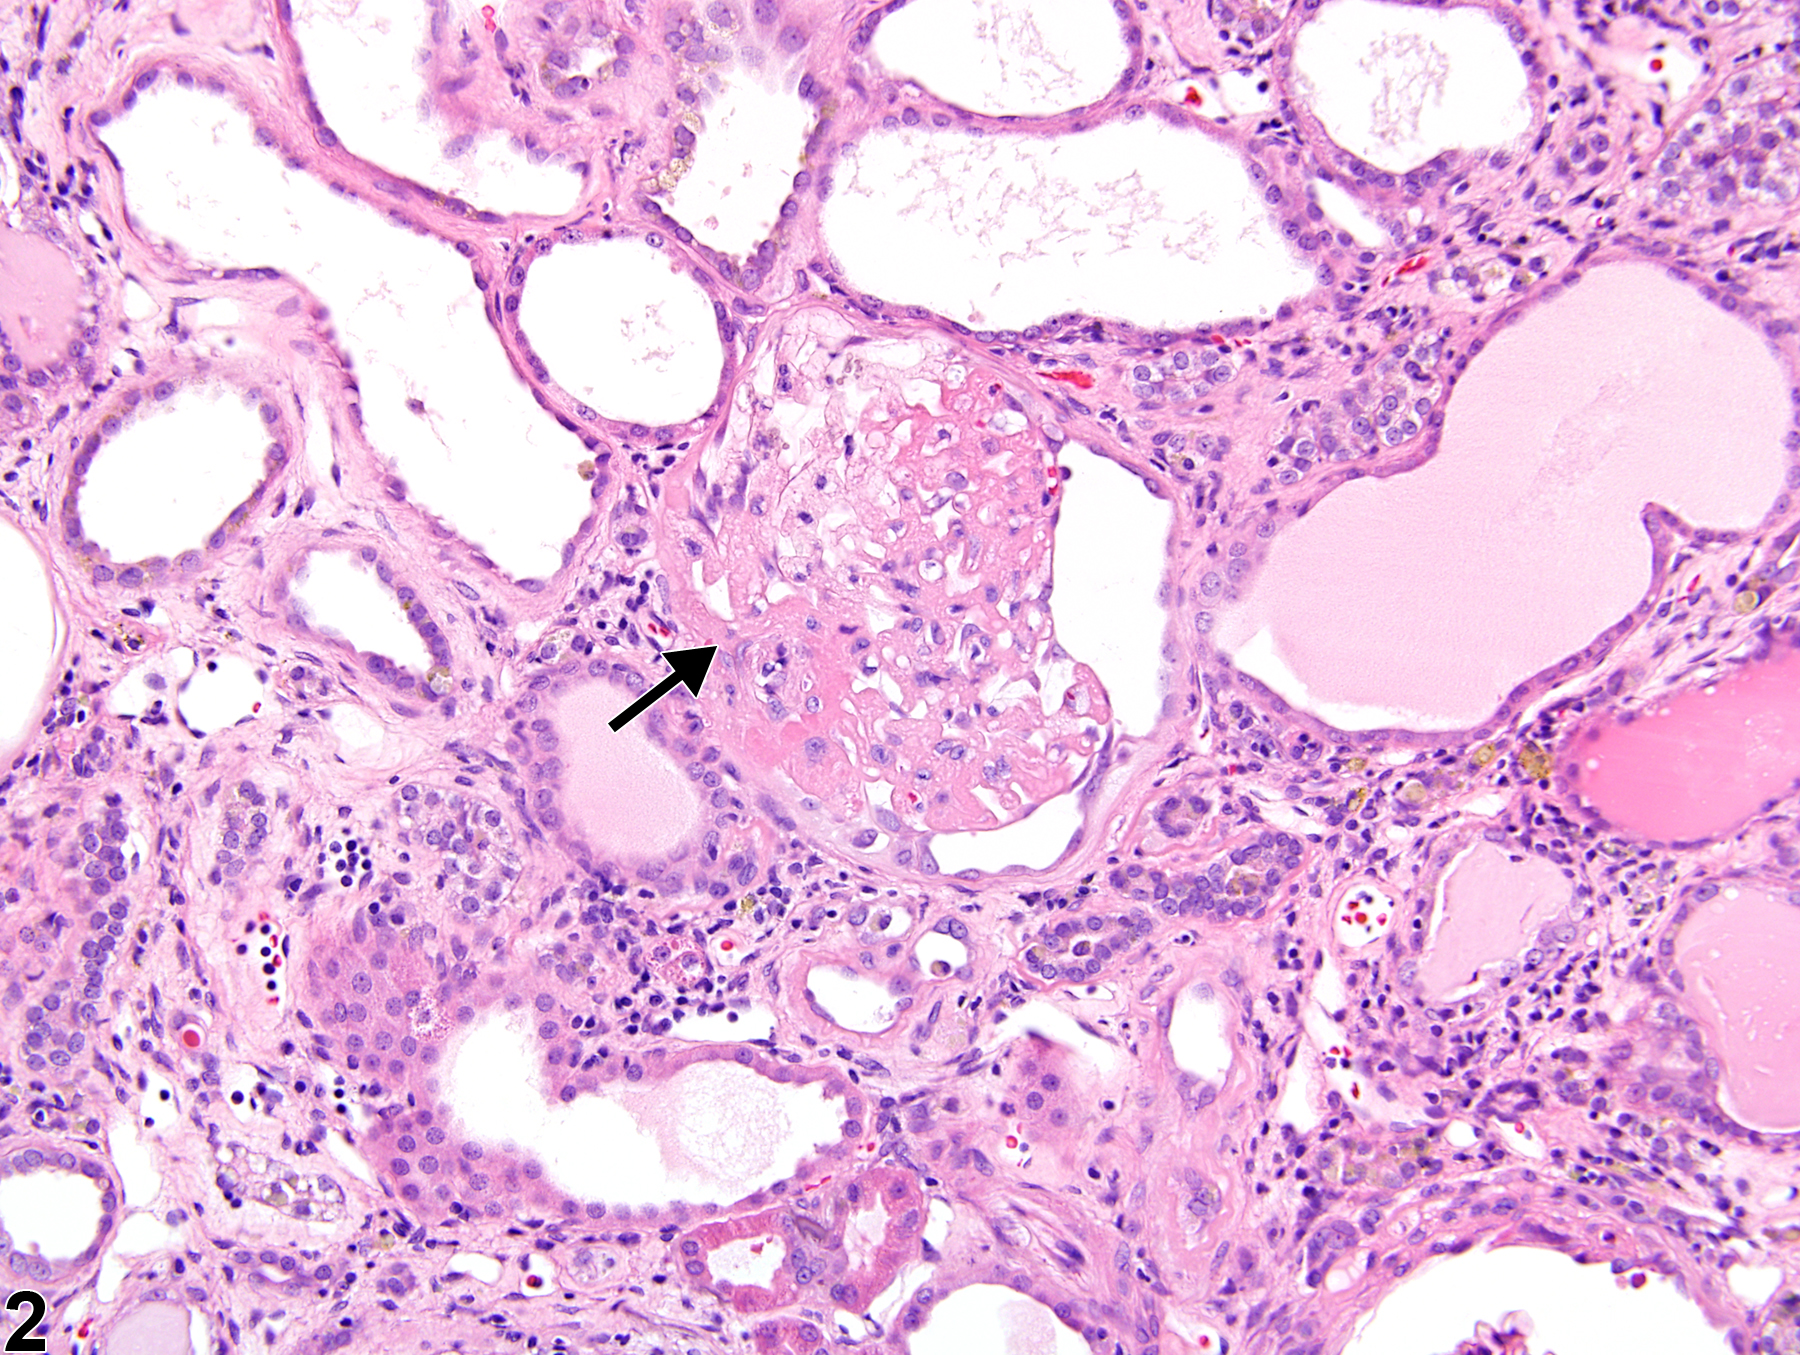 Image of glomerulosclerosis in the kidney from a male Wistar Han rat in a chronic study